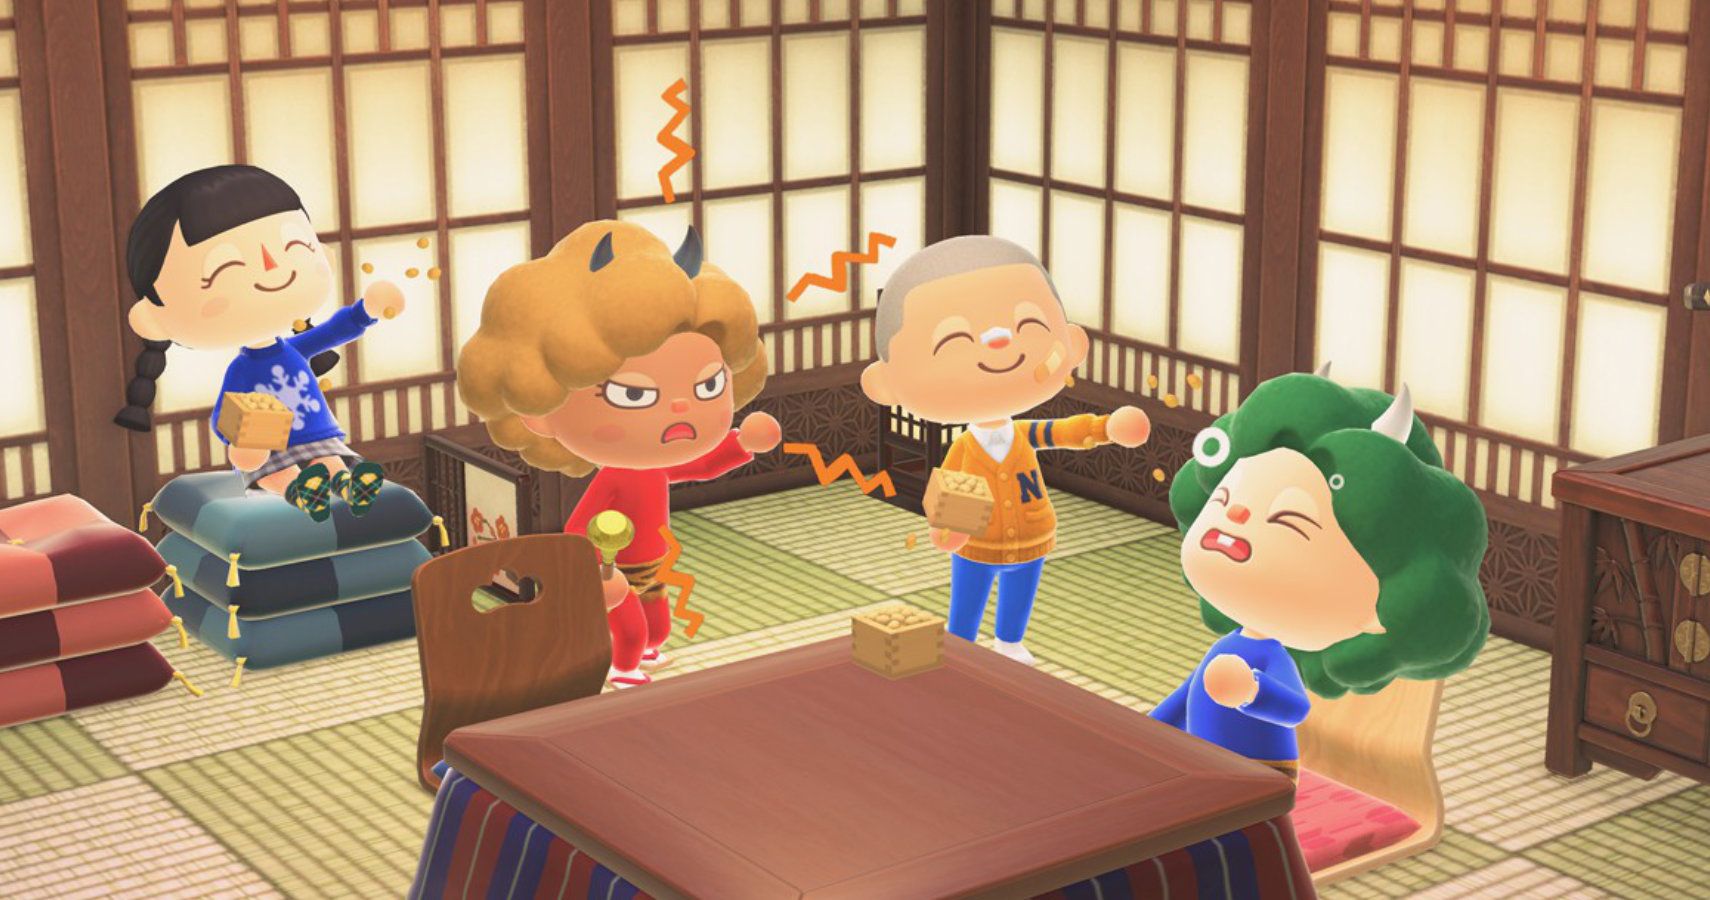 Animal Crossing characters playing with jumping beans.